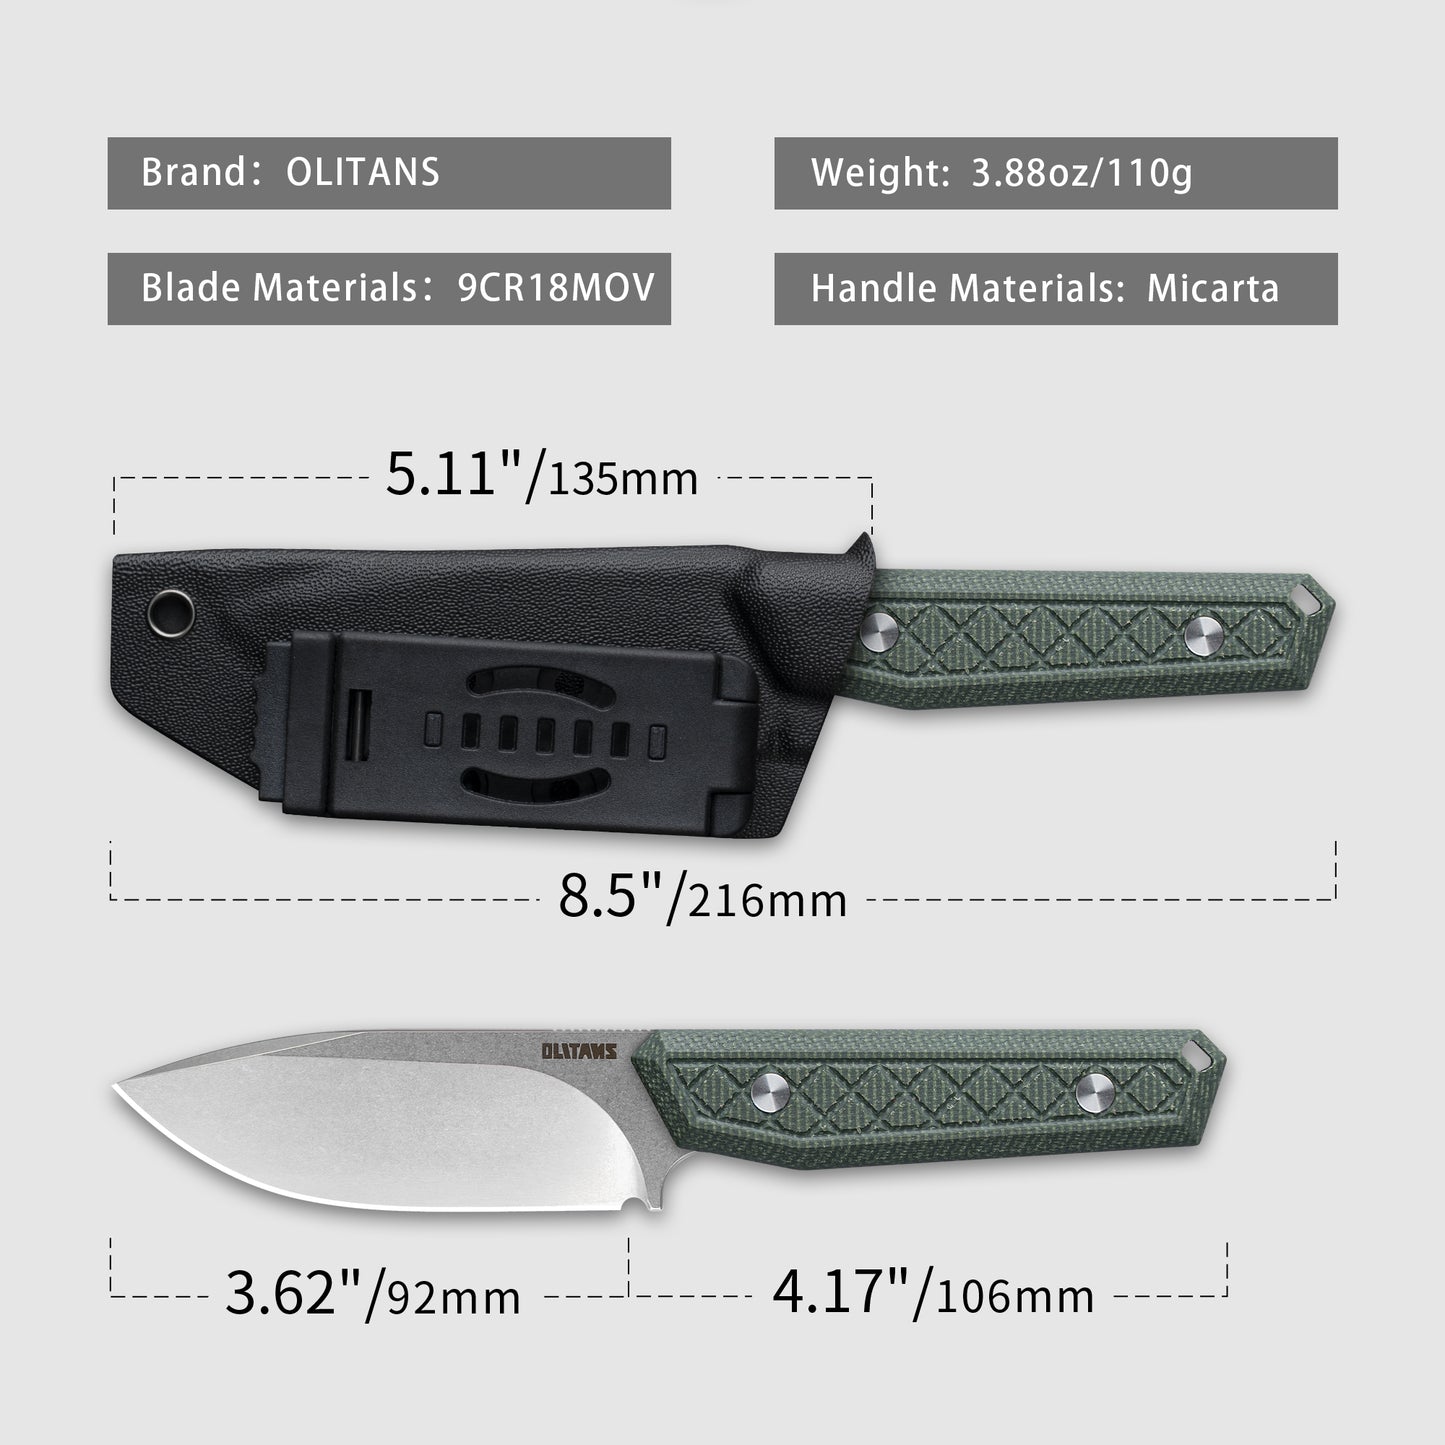 OLITANS G043 Fixed Blade Knife 3.62'' 9cr18mov steel Blade,4.17'' G10/Micarta handle Field Utility Knife with Kydex Sheath for Outdoor Camping Hiking